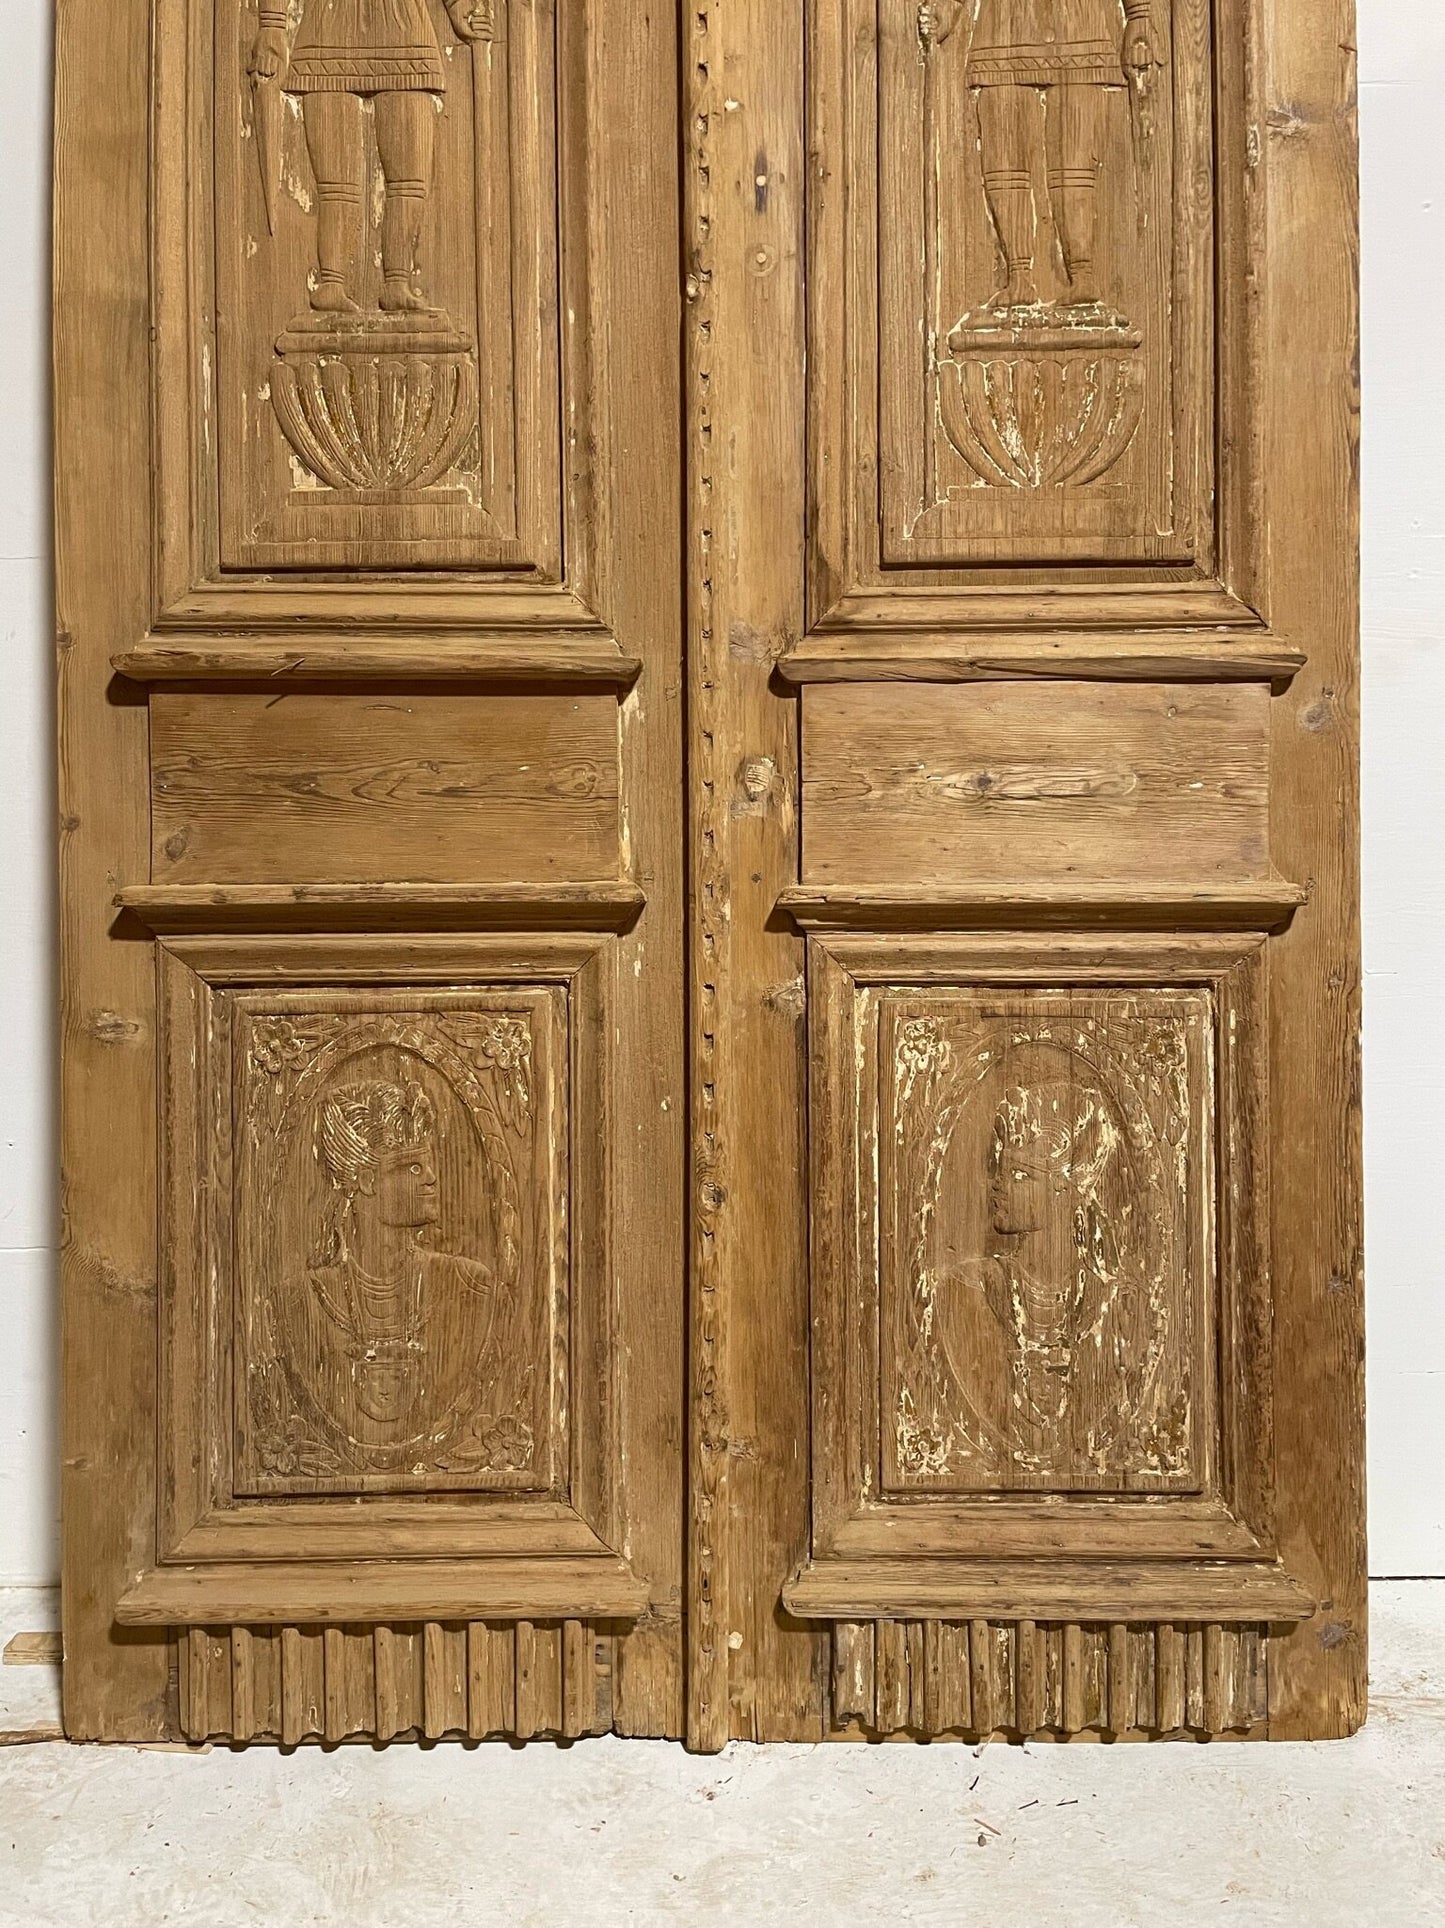 Antique French door (104x51.5) with carving D0212